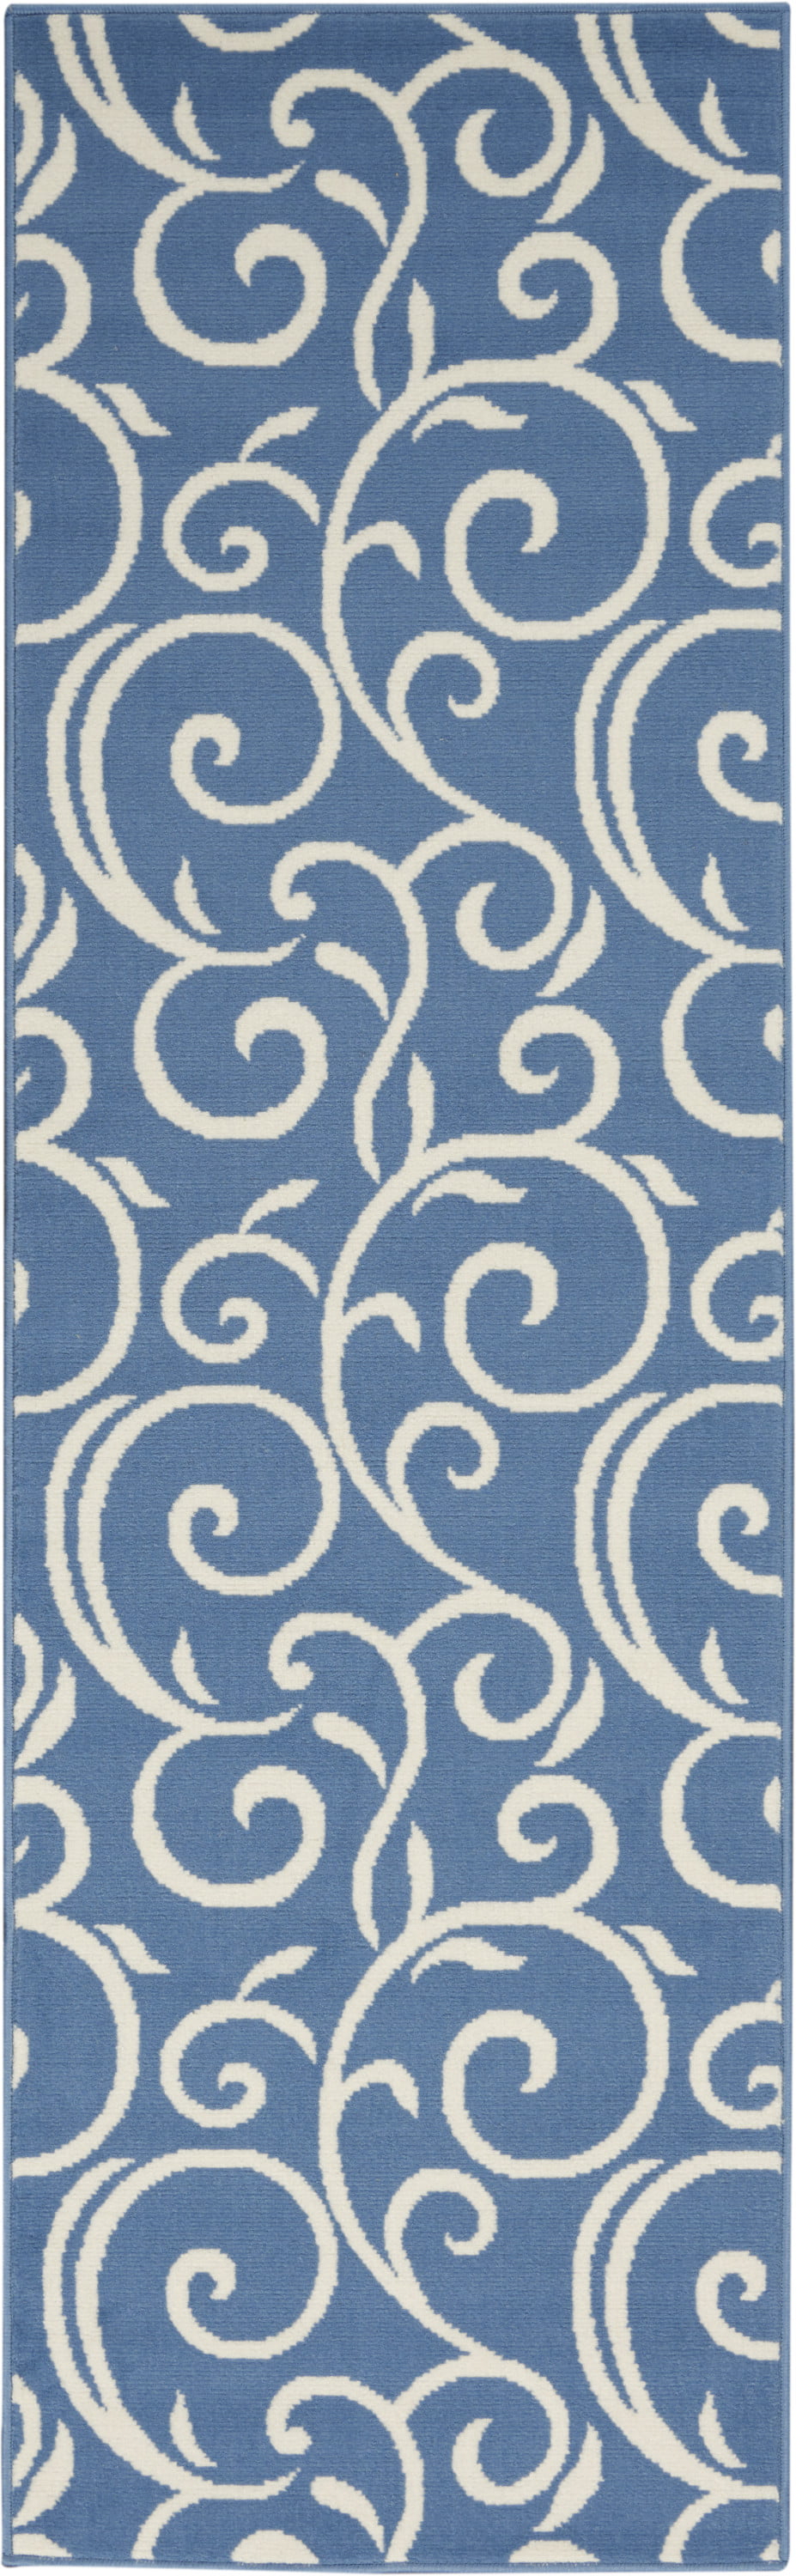 Rhody Rug CC48R120X120S 10 ft Casual Comfort Silvermist Banded Braided Rug44; Square 